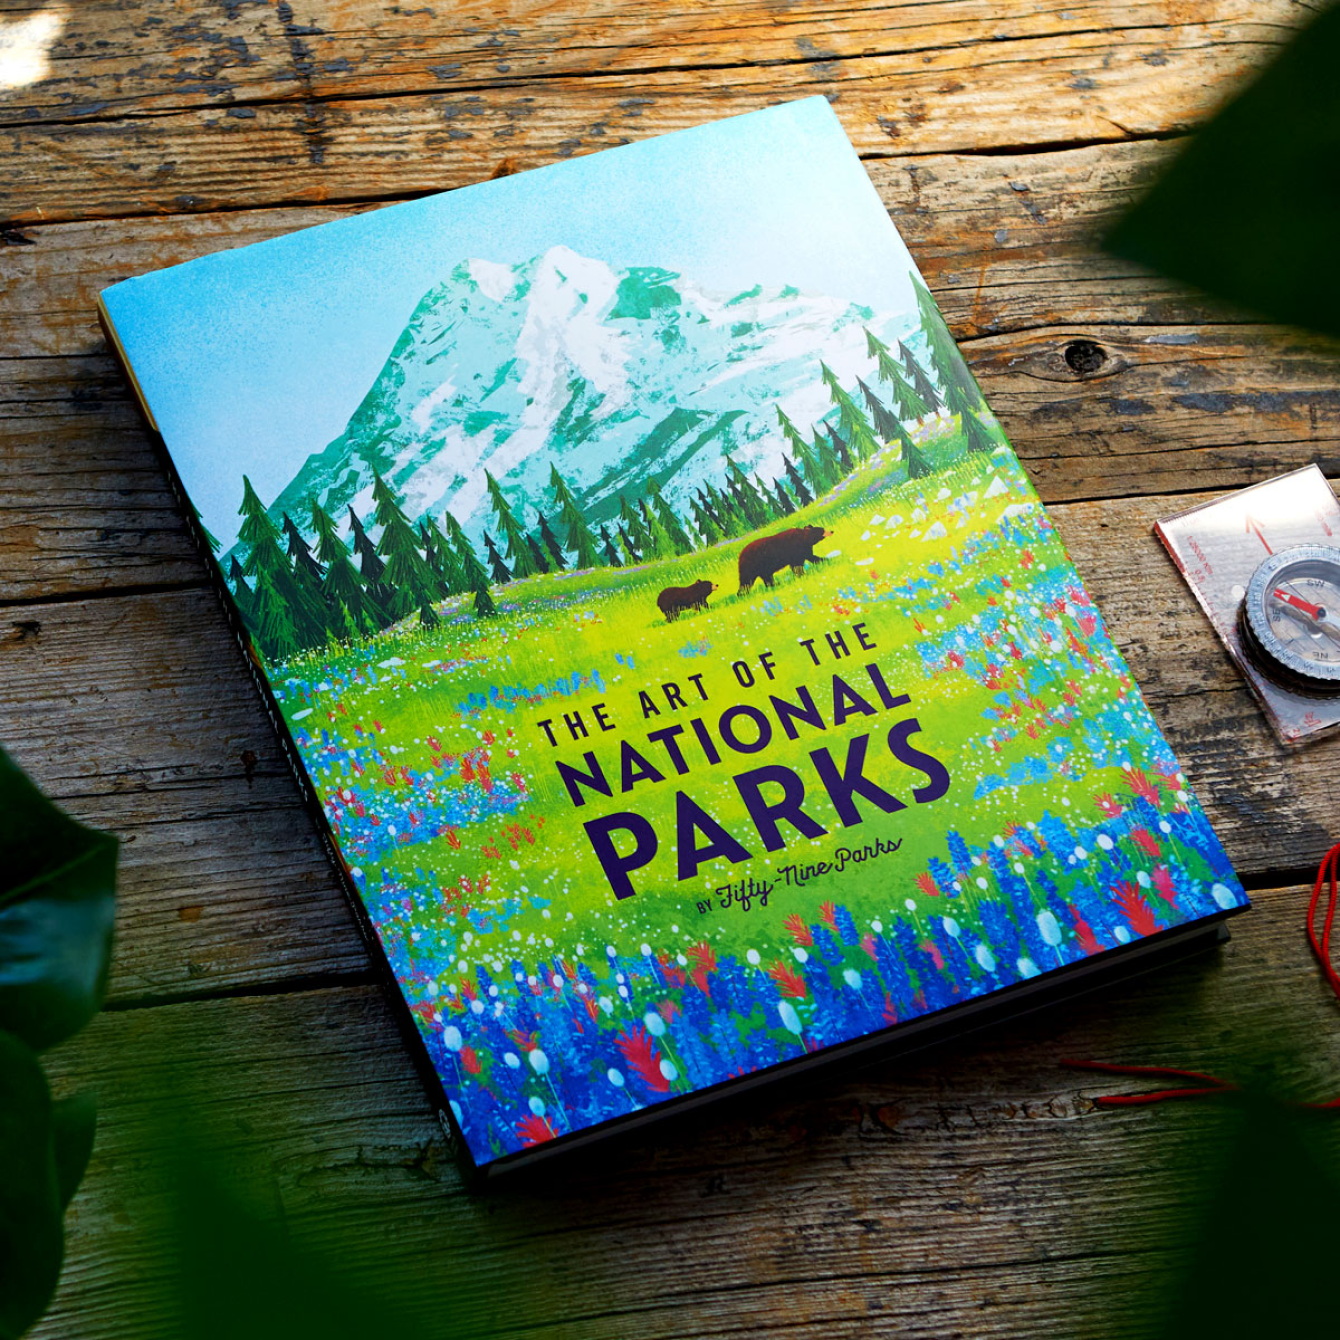 <b class="accent">FIG. 13 — </b> The Art of the National Parks book by The Fifty-Nine Parks Print Series and Insight Editions.